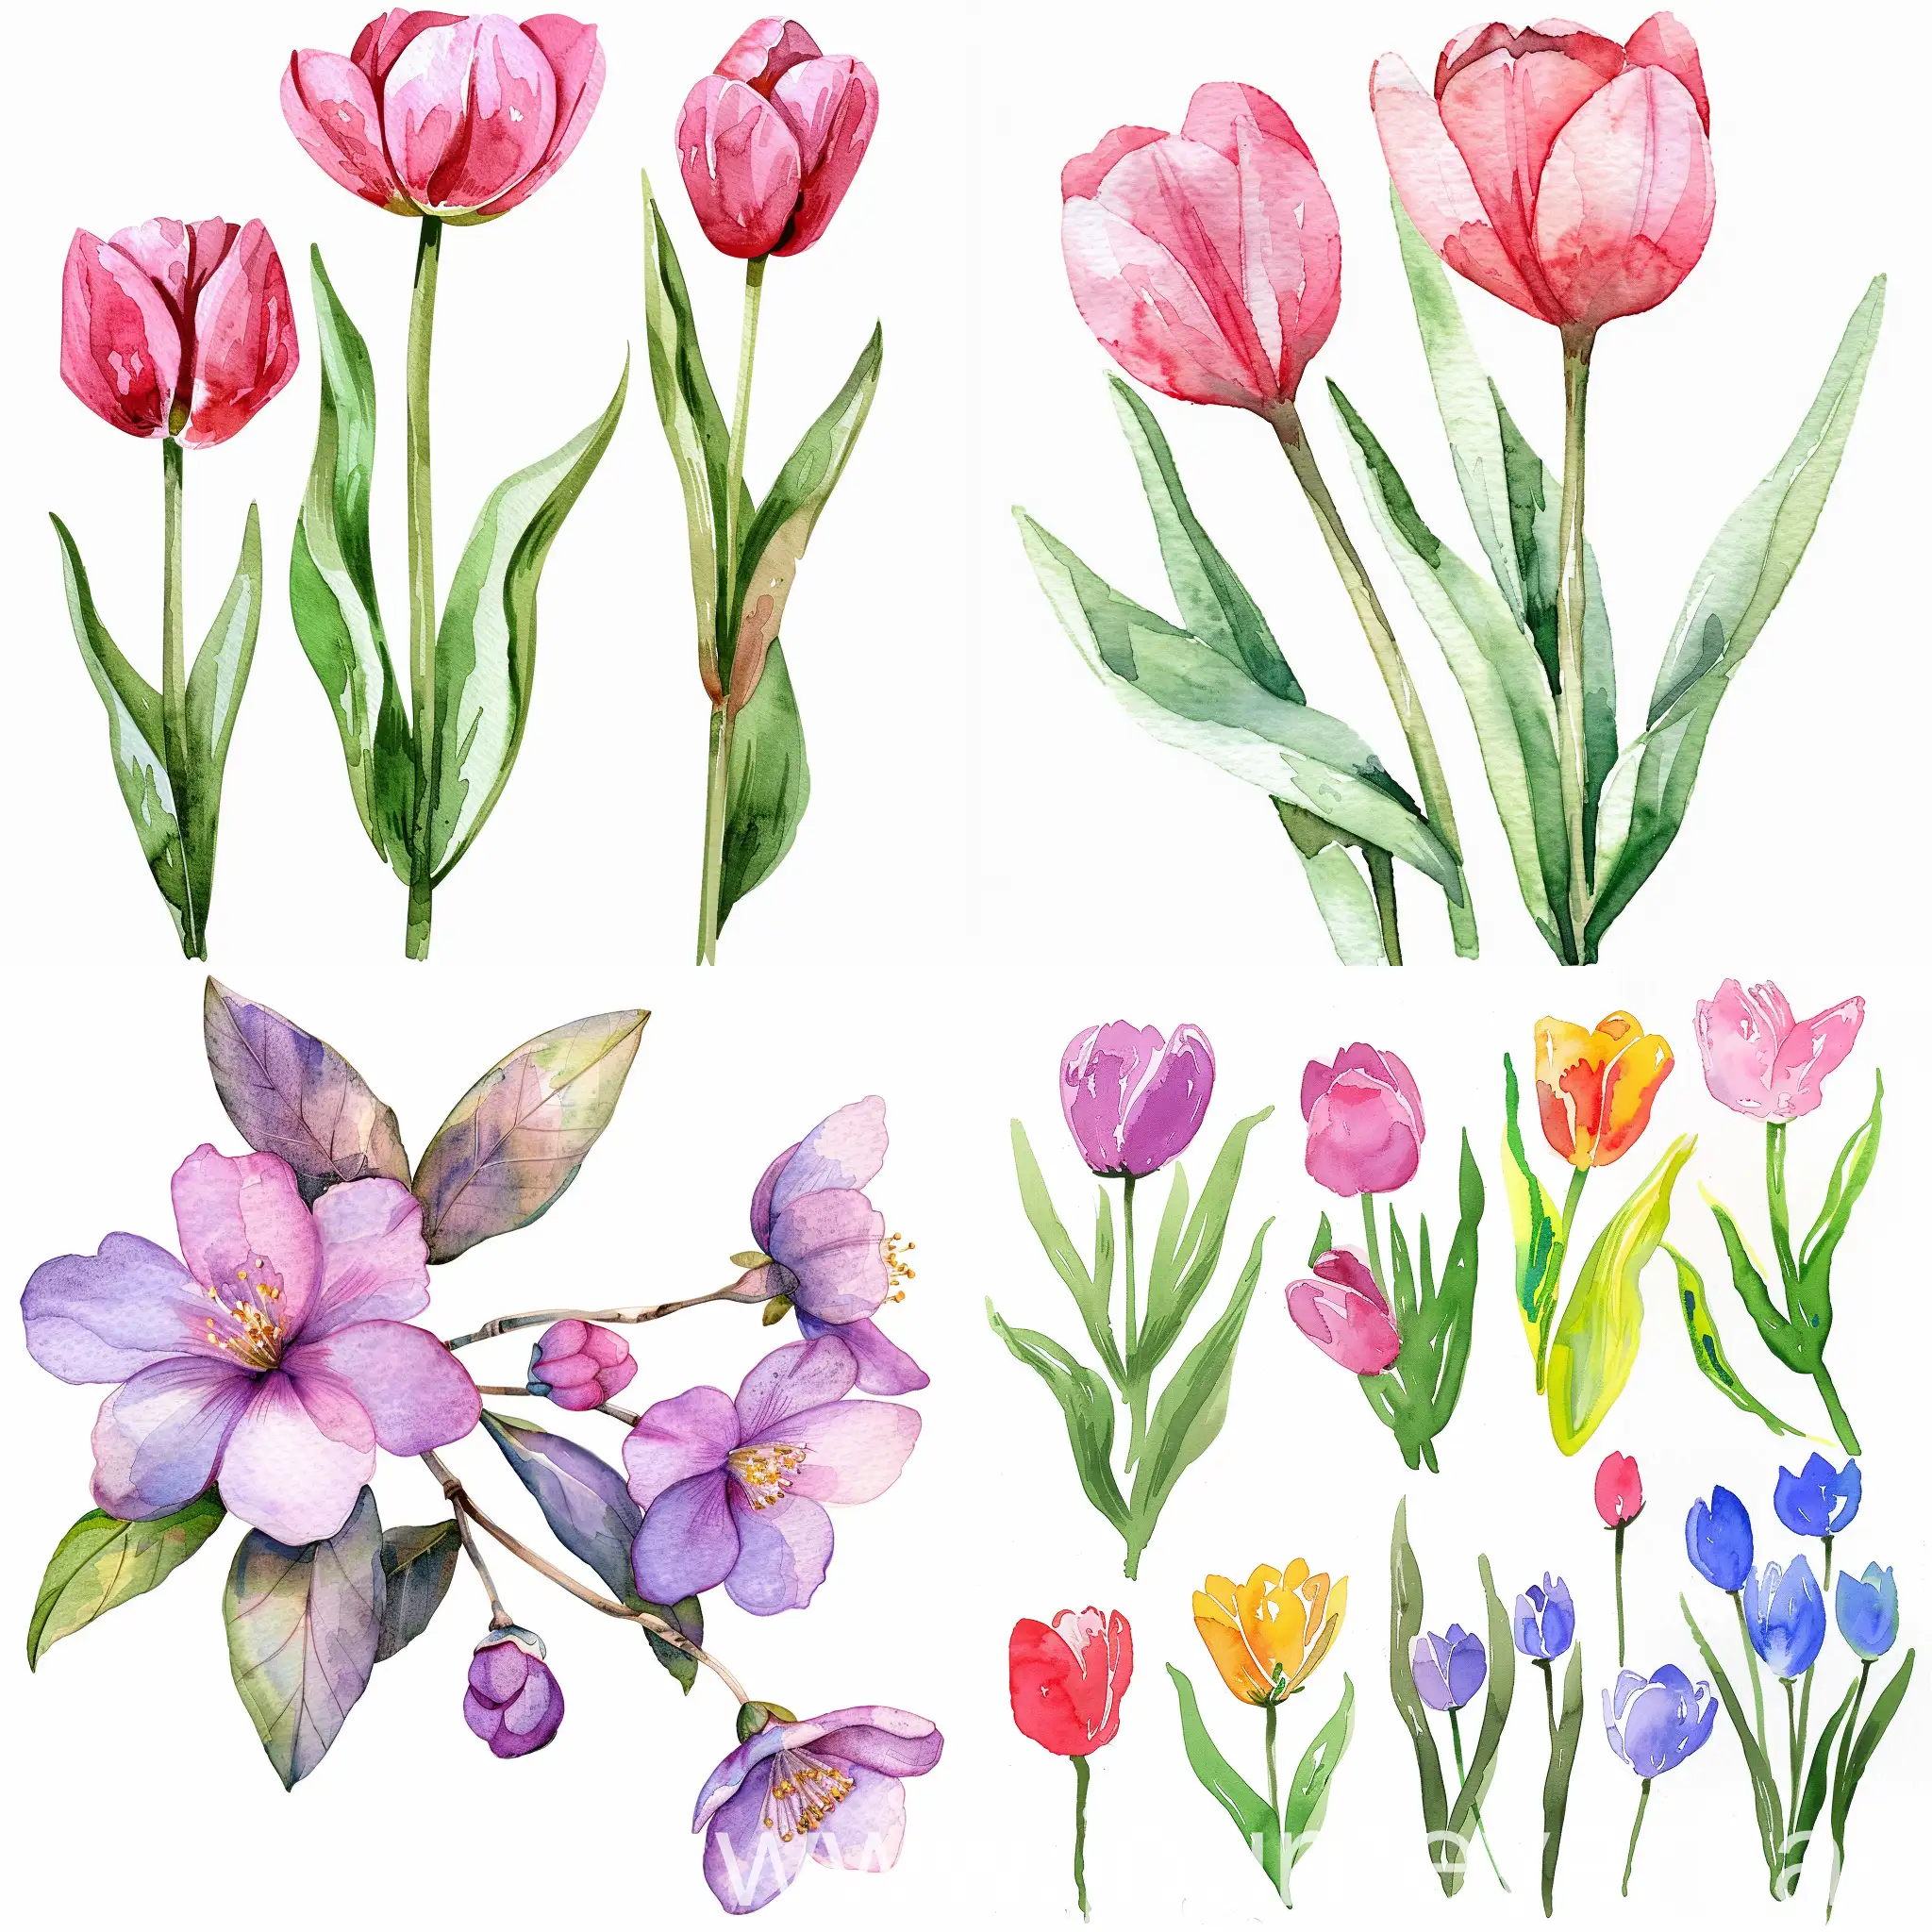 Vibrant-Watercolor-Spring-Clipart-Set-HighQuality-Floral-Illustrations